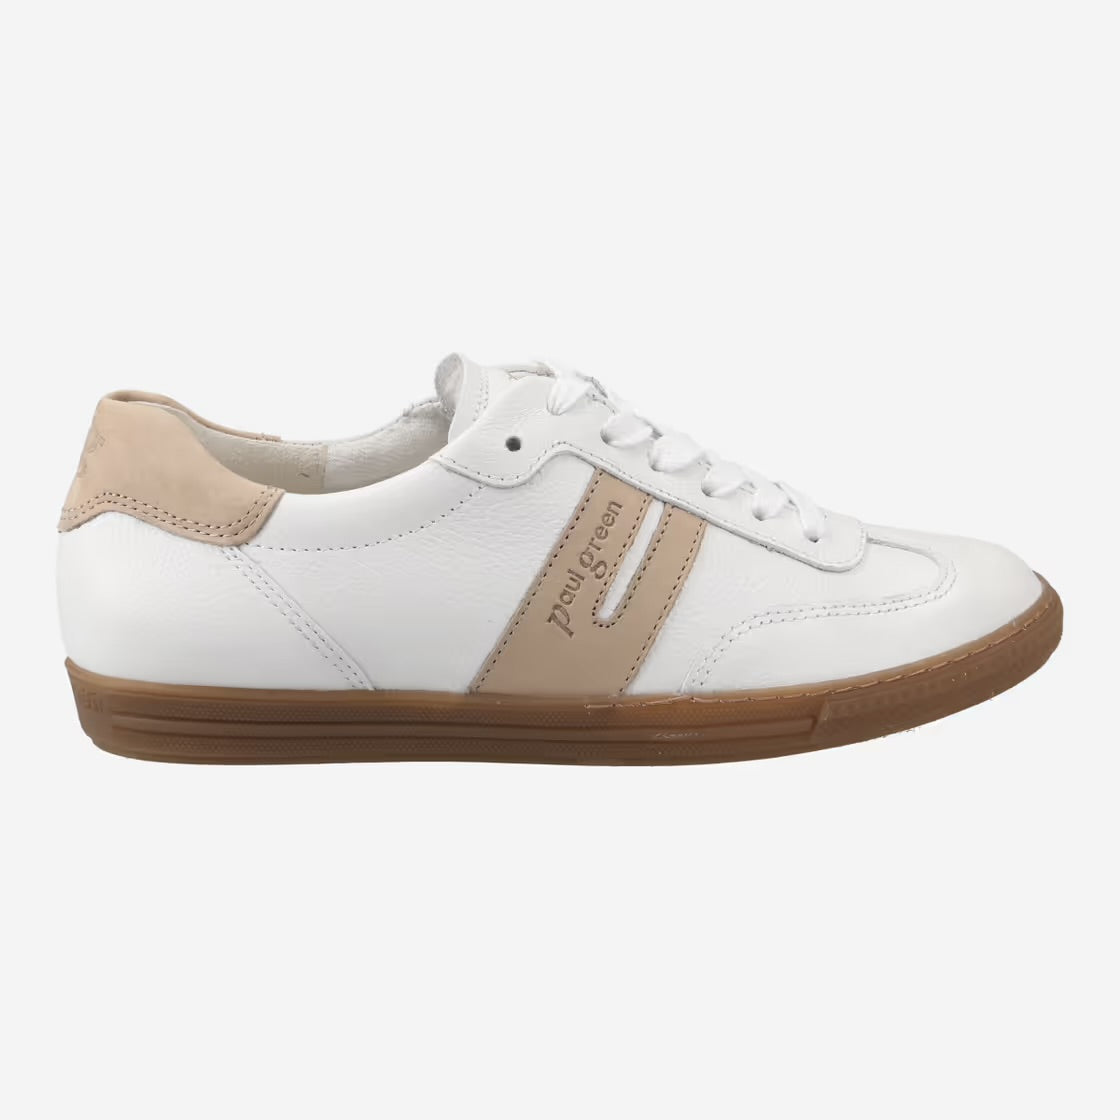 Paul Green - 5350 White and Beige Trainer